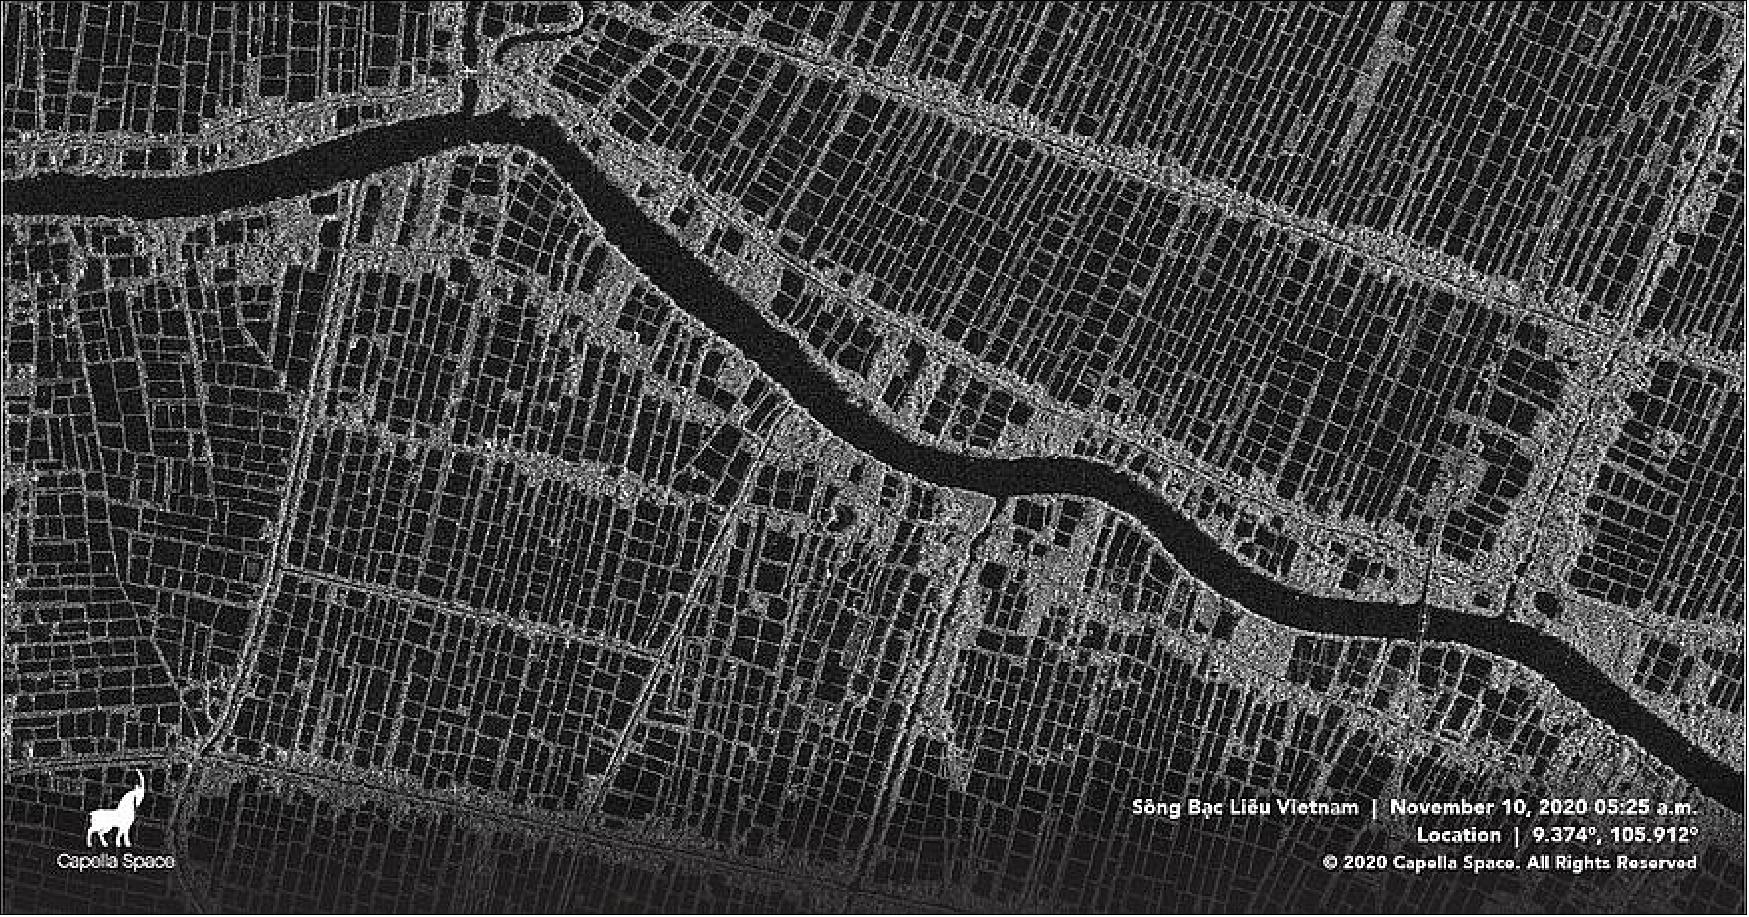 Figure 13: Capella Space tweeted this Nov. 10 Sequoia synthetic aperture radar image of the embankments of the Sông Bac Liêu flowing just south of the Mekong Delta in Vietnam (image credit: Capella Space)